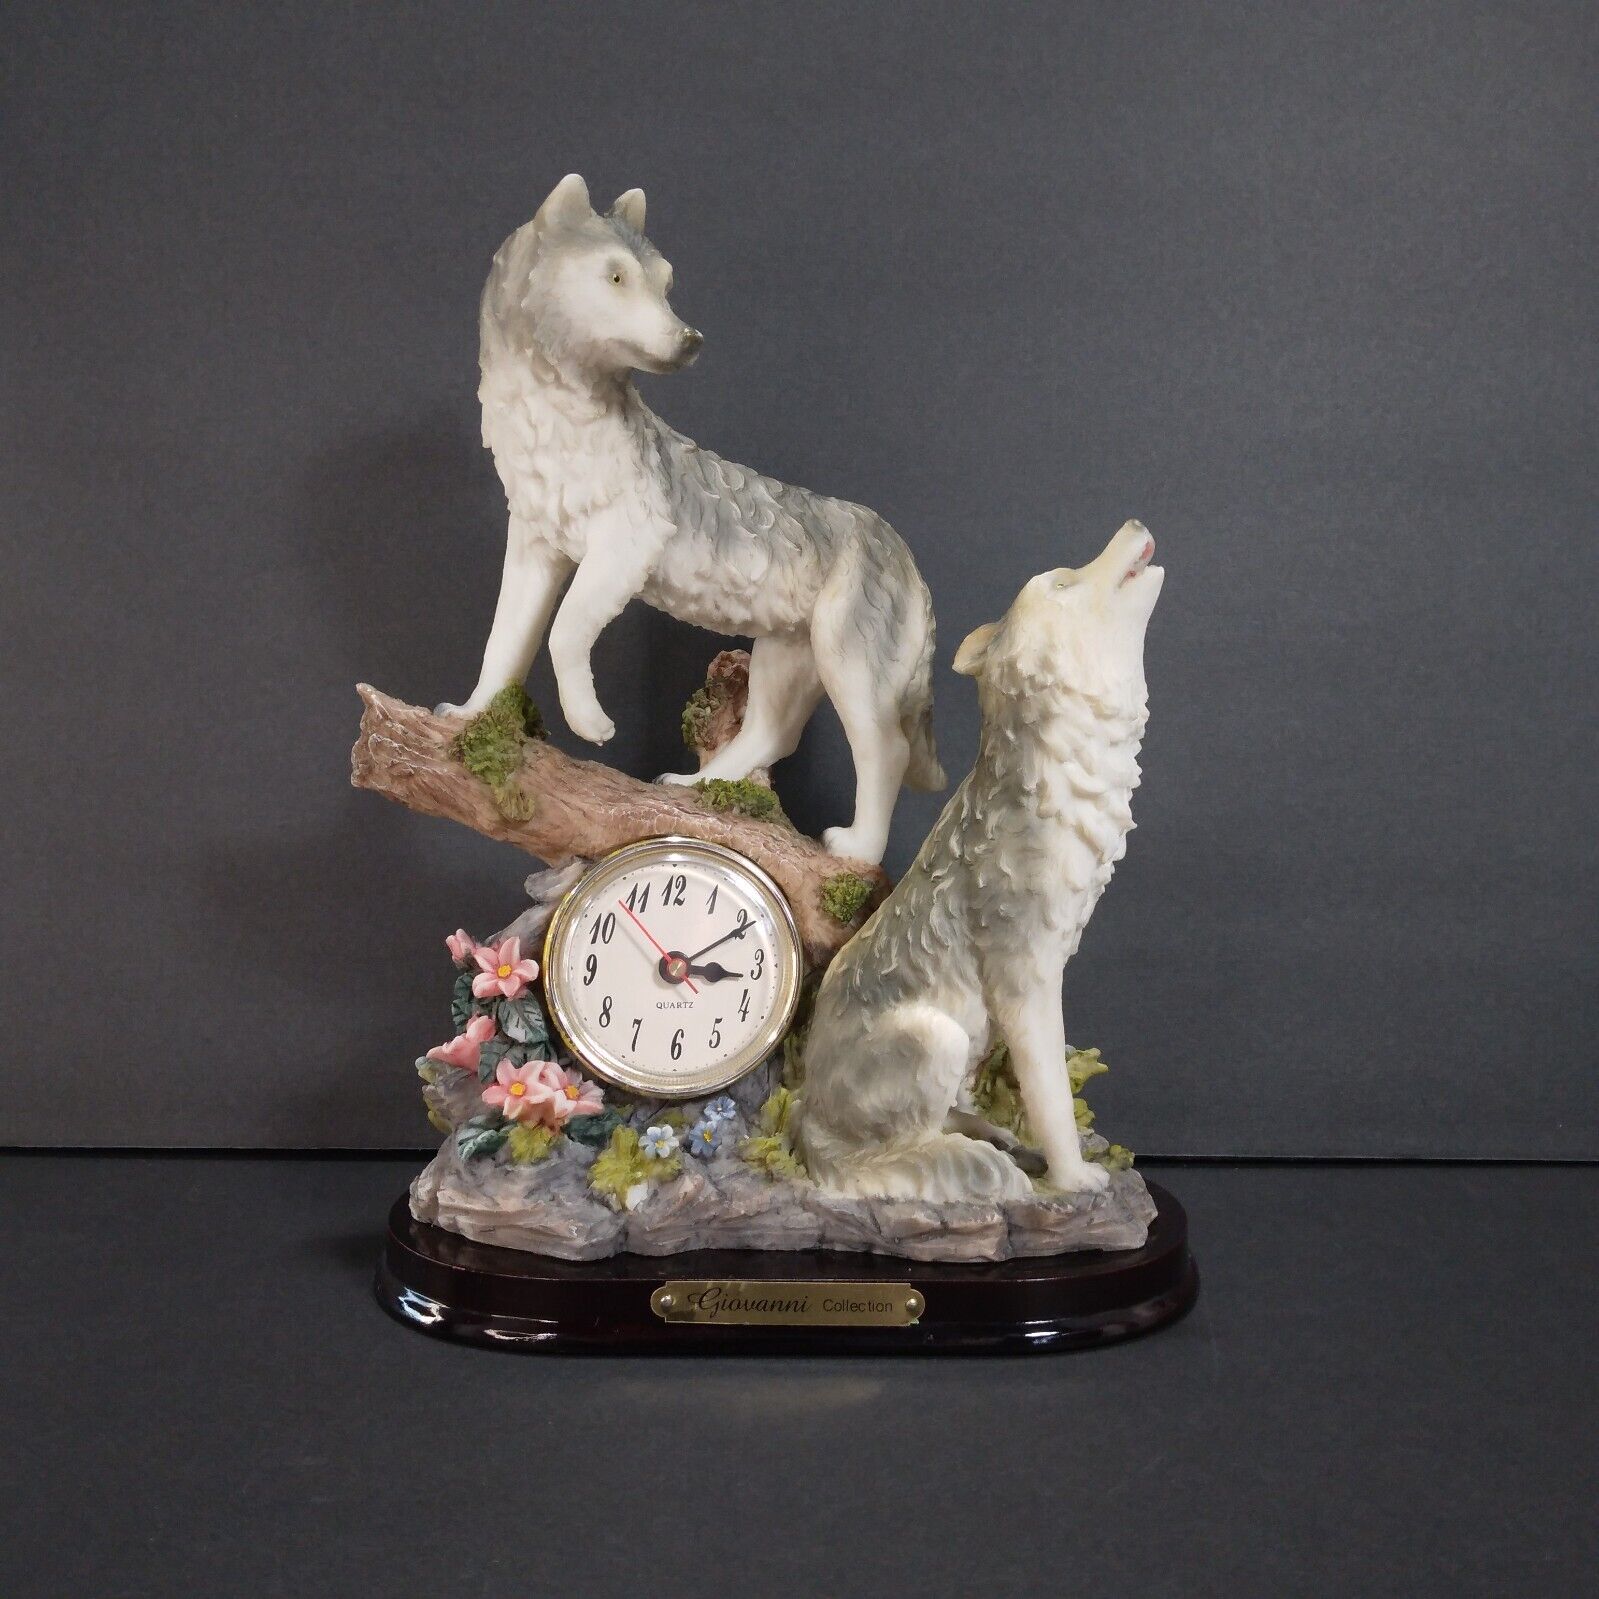 Giovanni Collection Wolf Pack Figurine Statue On Wood Base 10”H NonWorkingClock